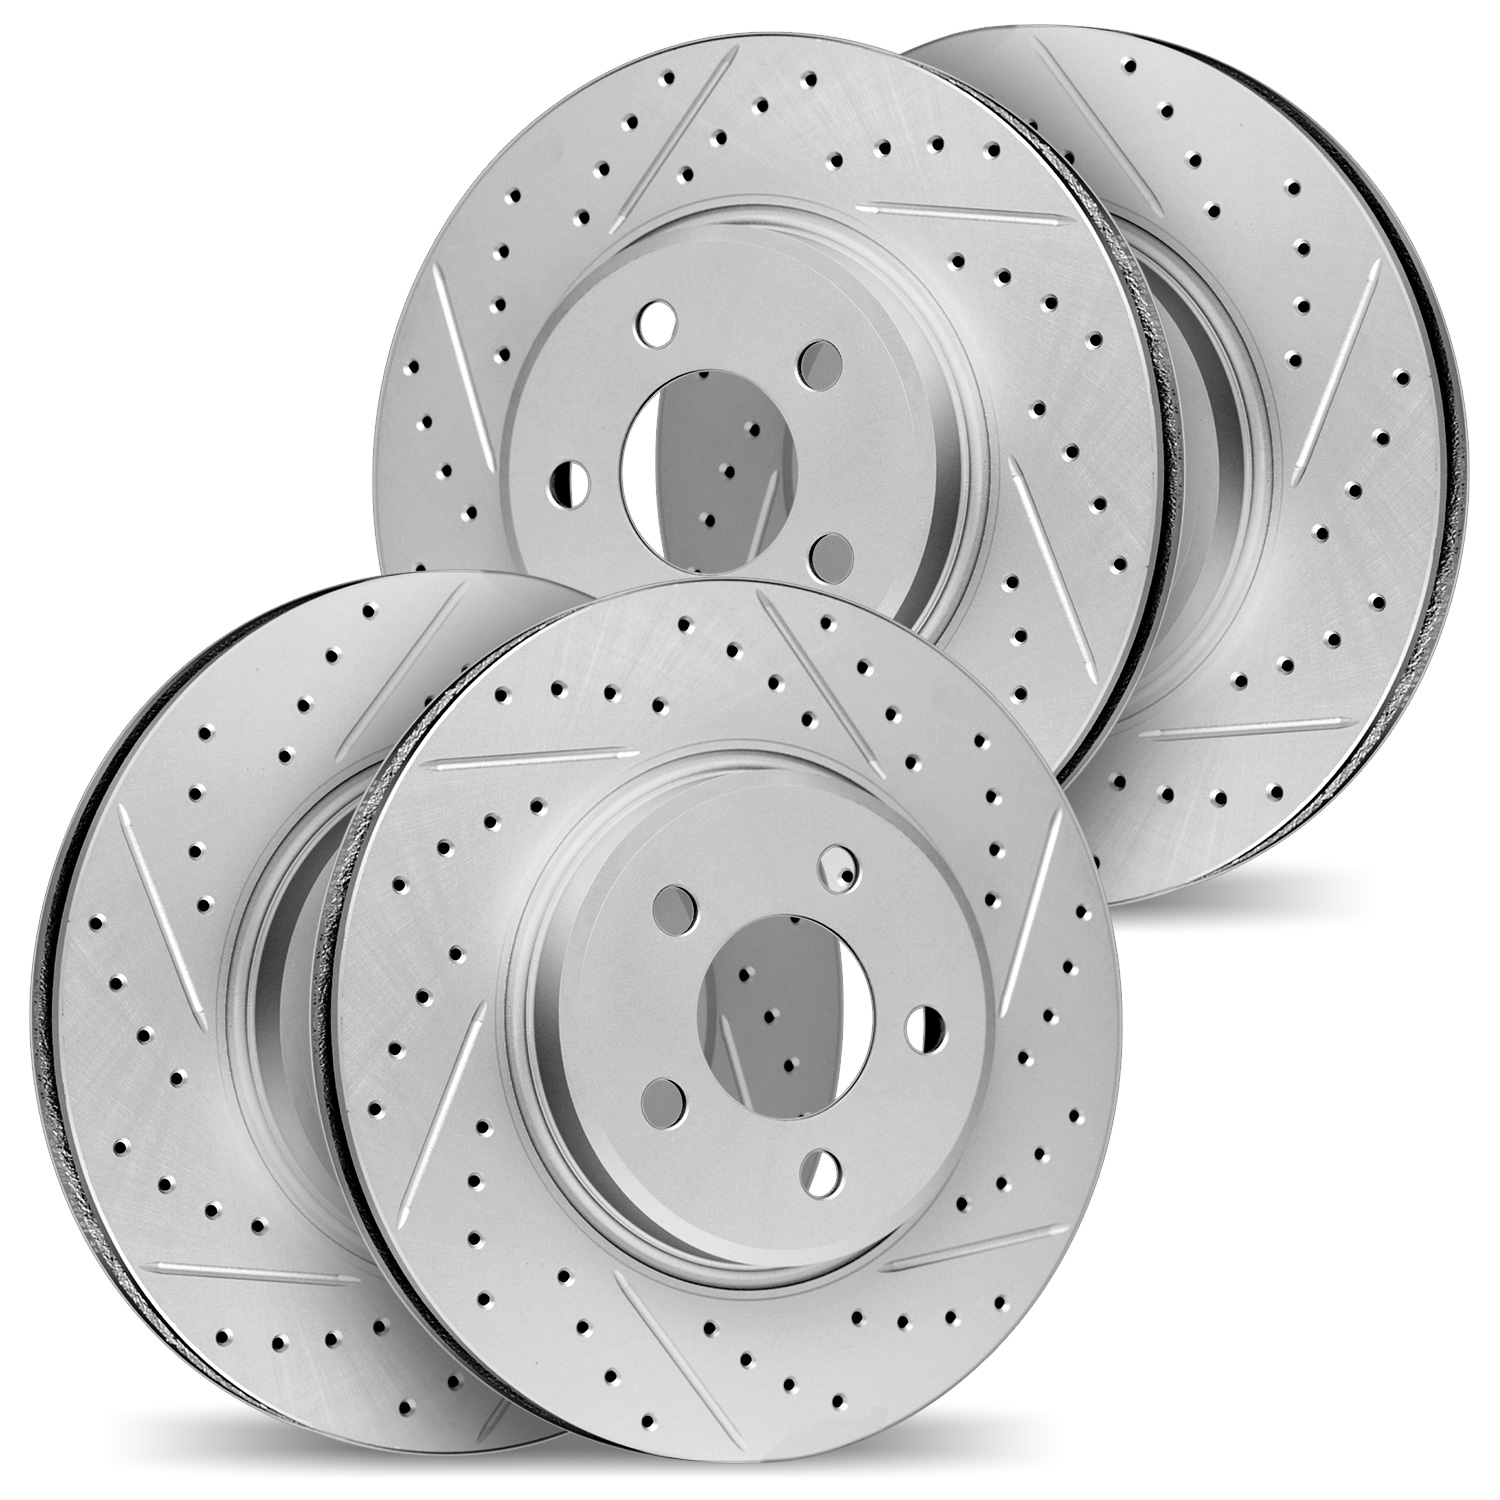 2004-42001 Geoperformance Drilled/Slotted Brake Rotors, Fits Select Mopar, Position: Front and Rear